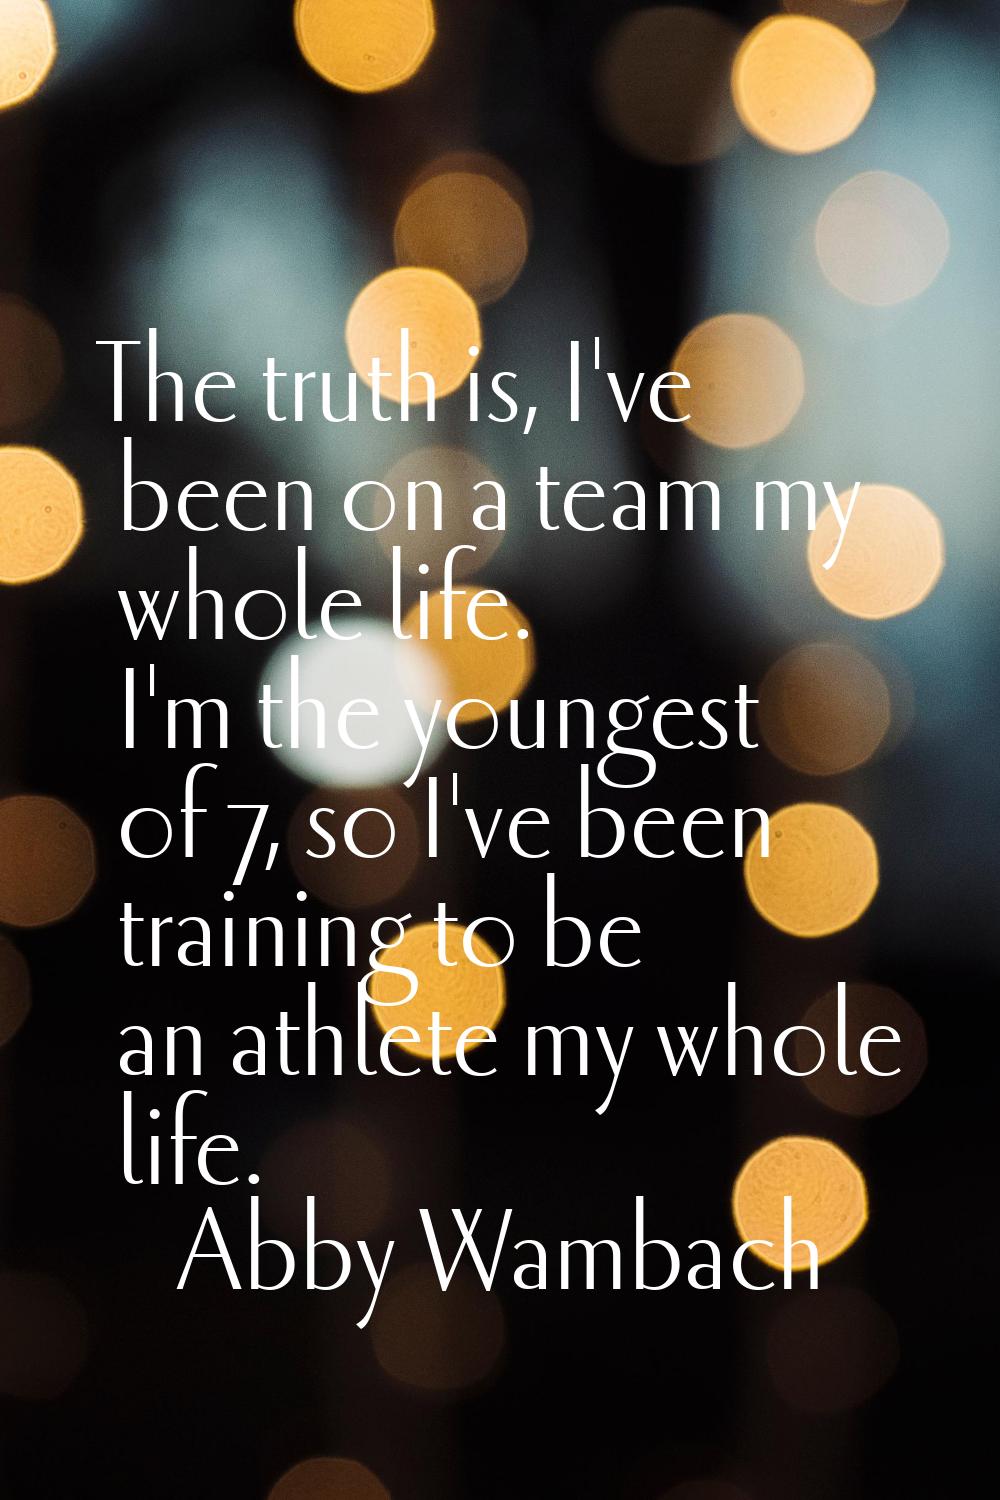 The truth is, I've been on a team my whole life. I'm the youngest of 7, so I've been training to be